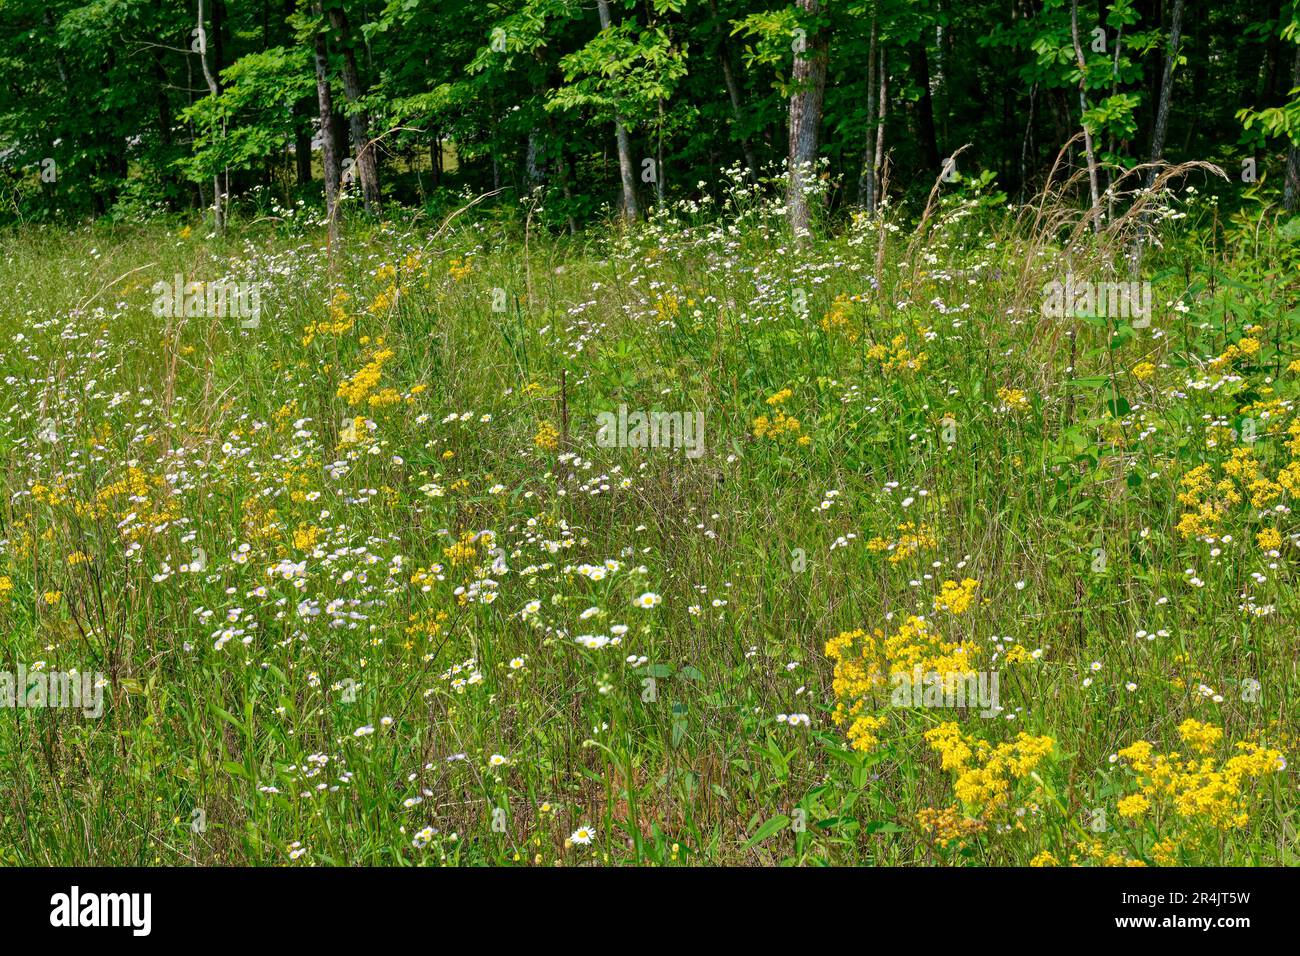 Field full of wildflowers with daisies butterweed fleabane and tall grasses with a forest in the background alongside the road on a sunny day in late Stock Photo